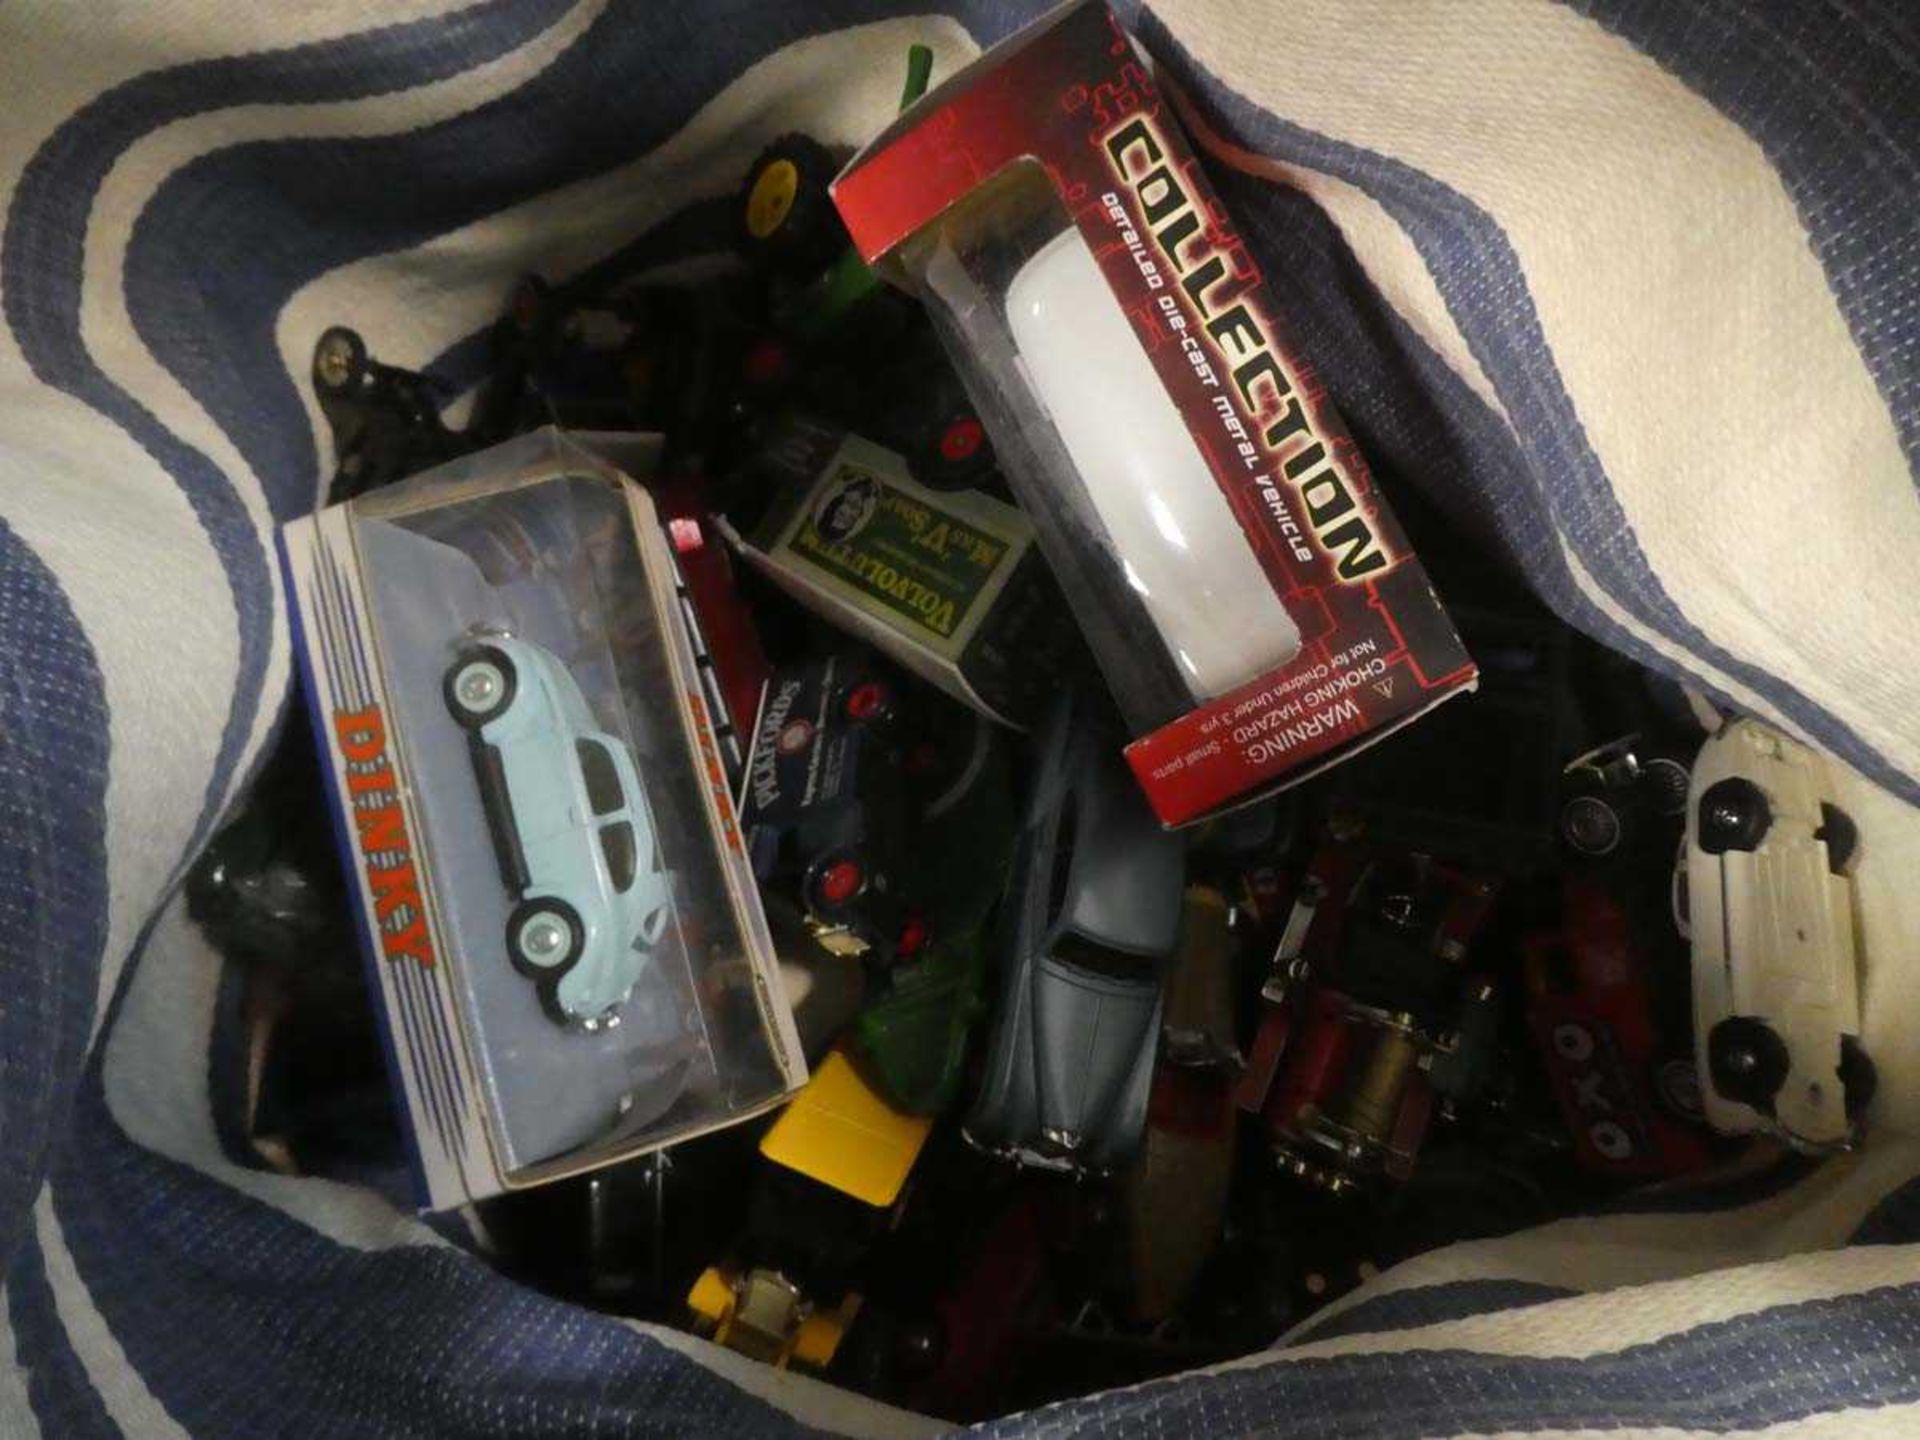 Bag containing qty of play worn and boxed Diecast toys